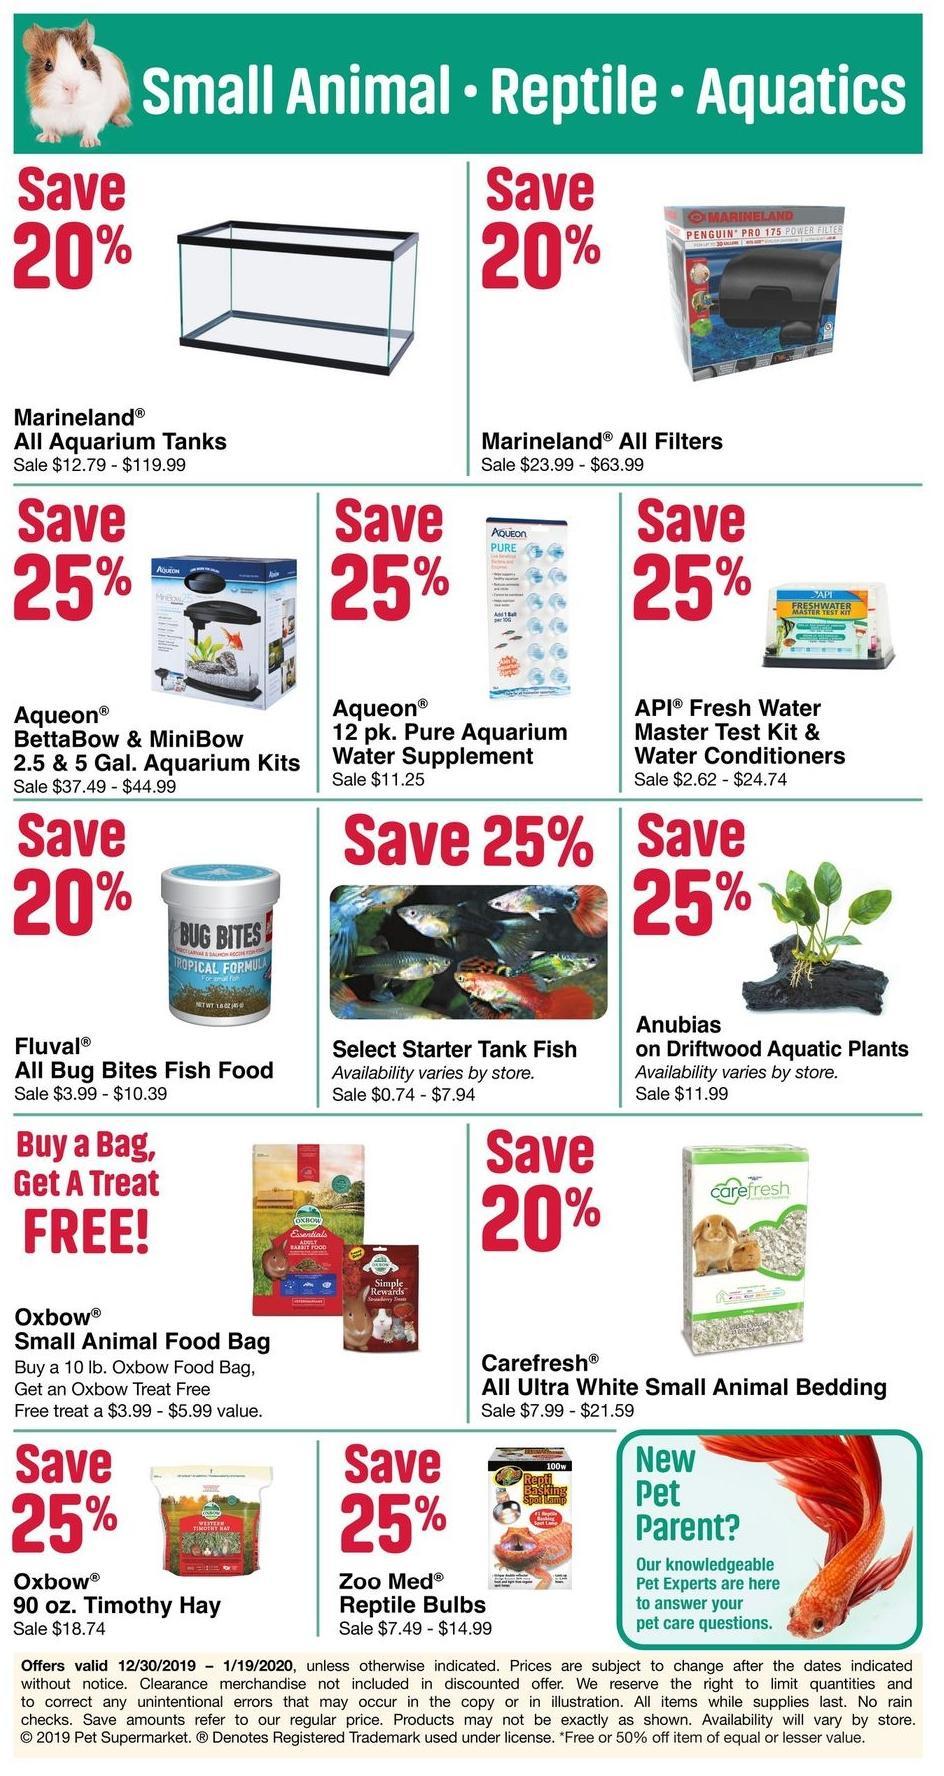 Pet Supermarket Weekly Ad from December 30